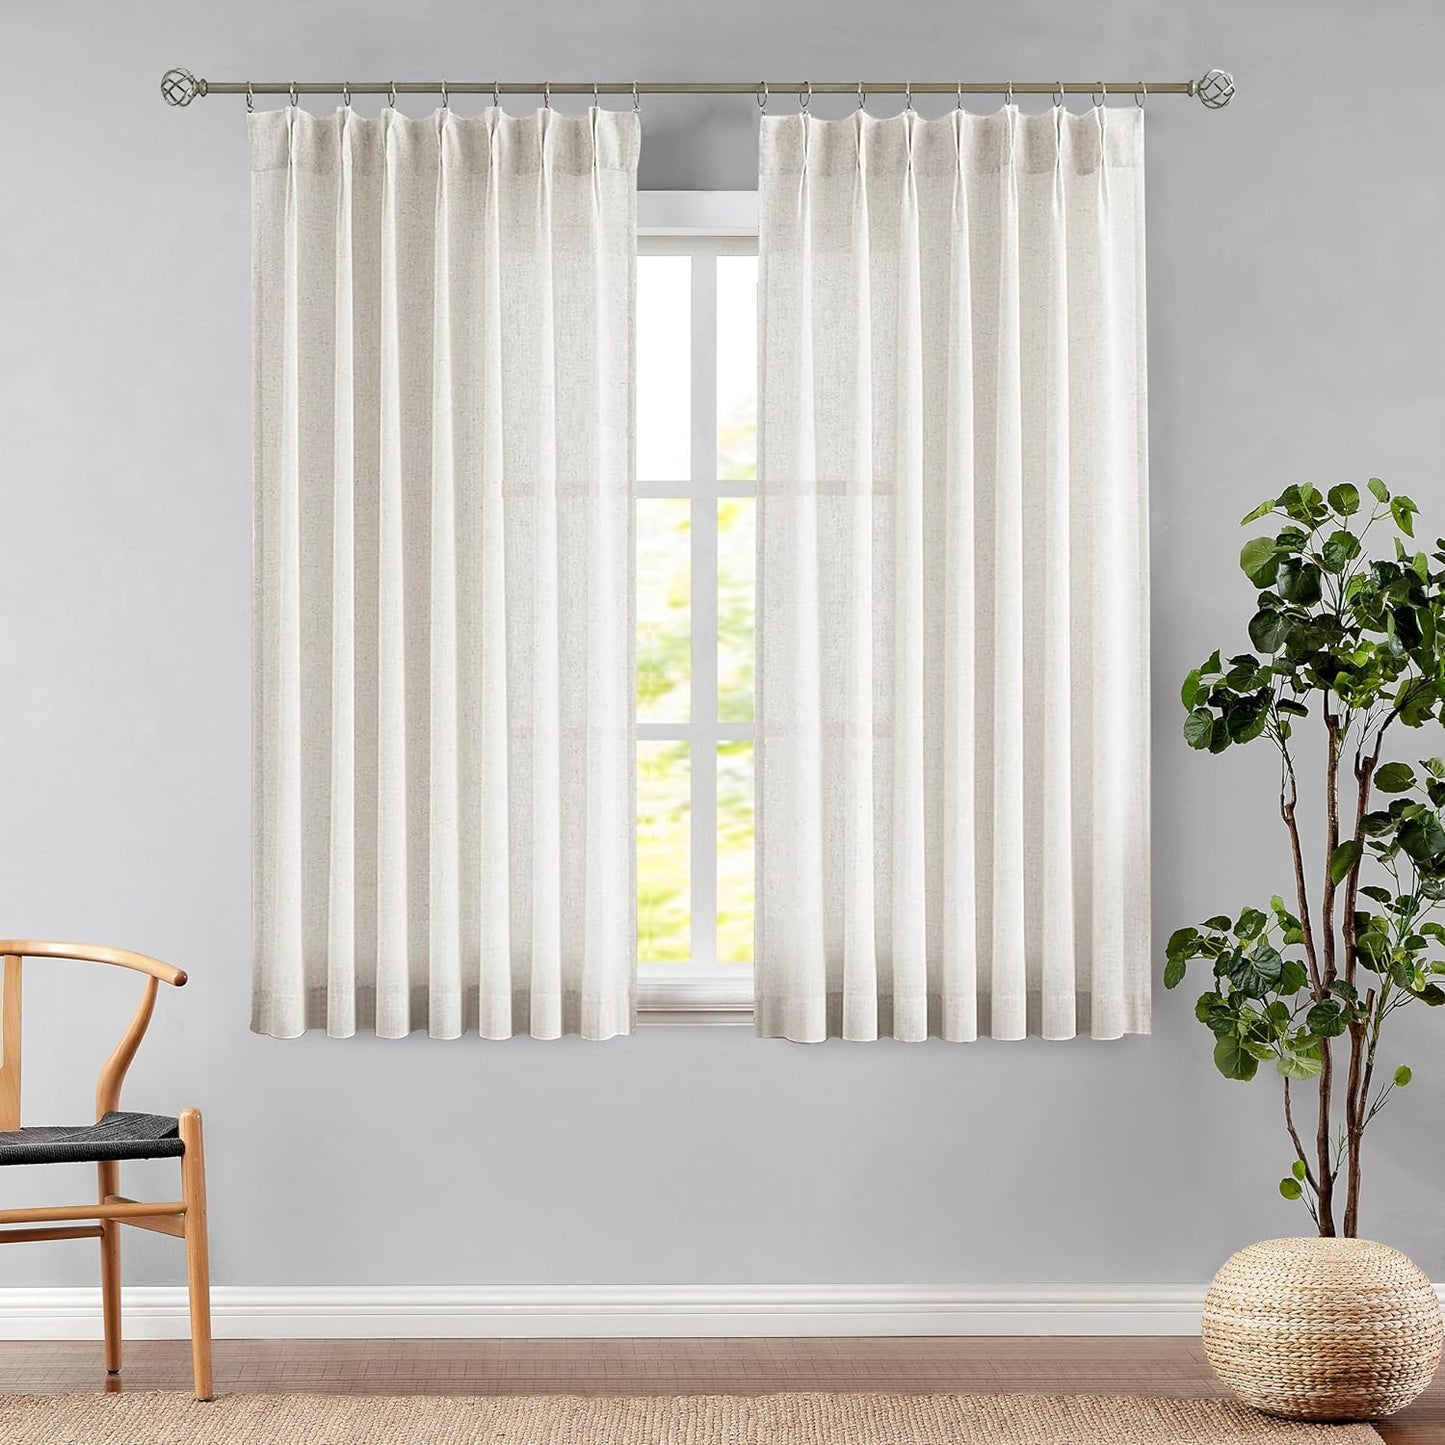 Central Park White Pinch Pleat Sheer Curtain 108 Inches Extra Long Textured Farmhouse Window Treatment Drapery Sets for Living Room Bedroom, 40"X108"X2  Central Park Linen/Pinch 40"X63"X2 